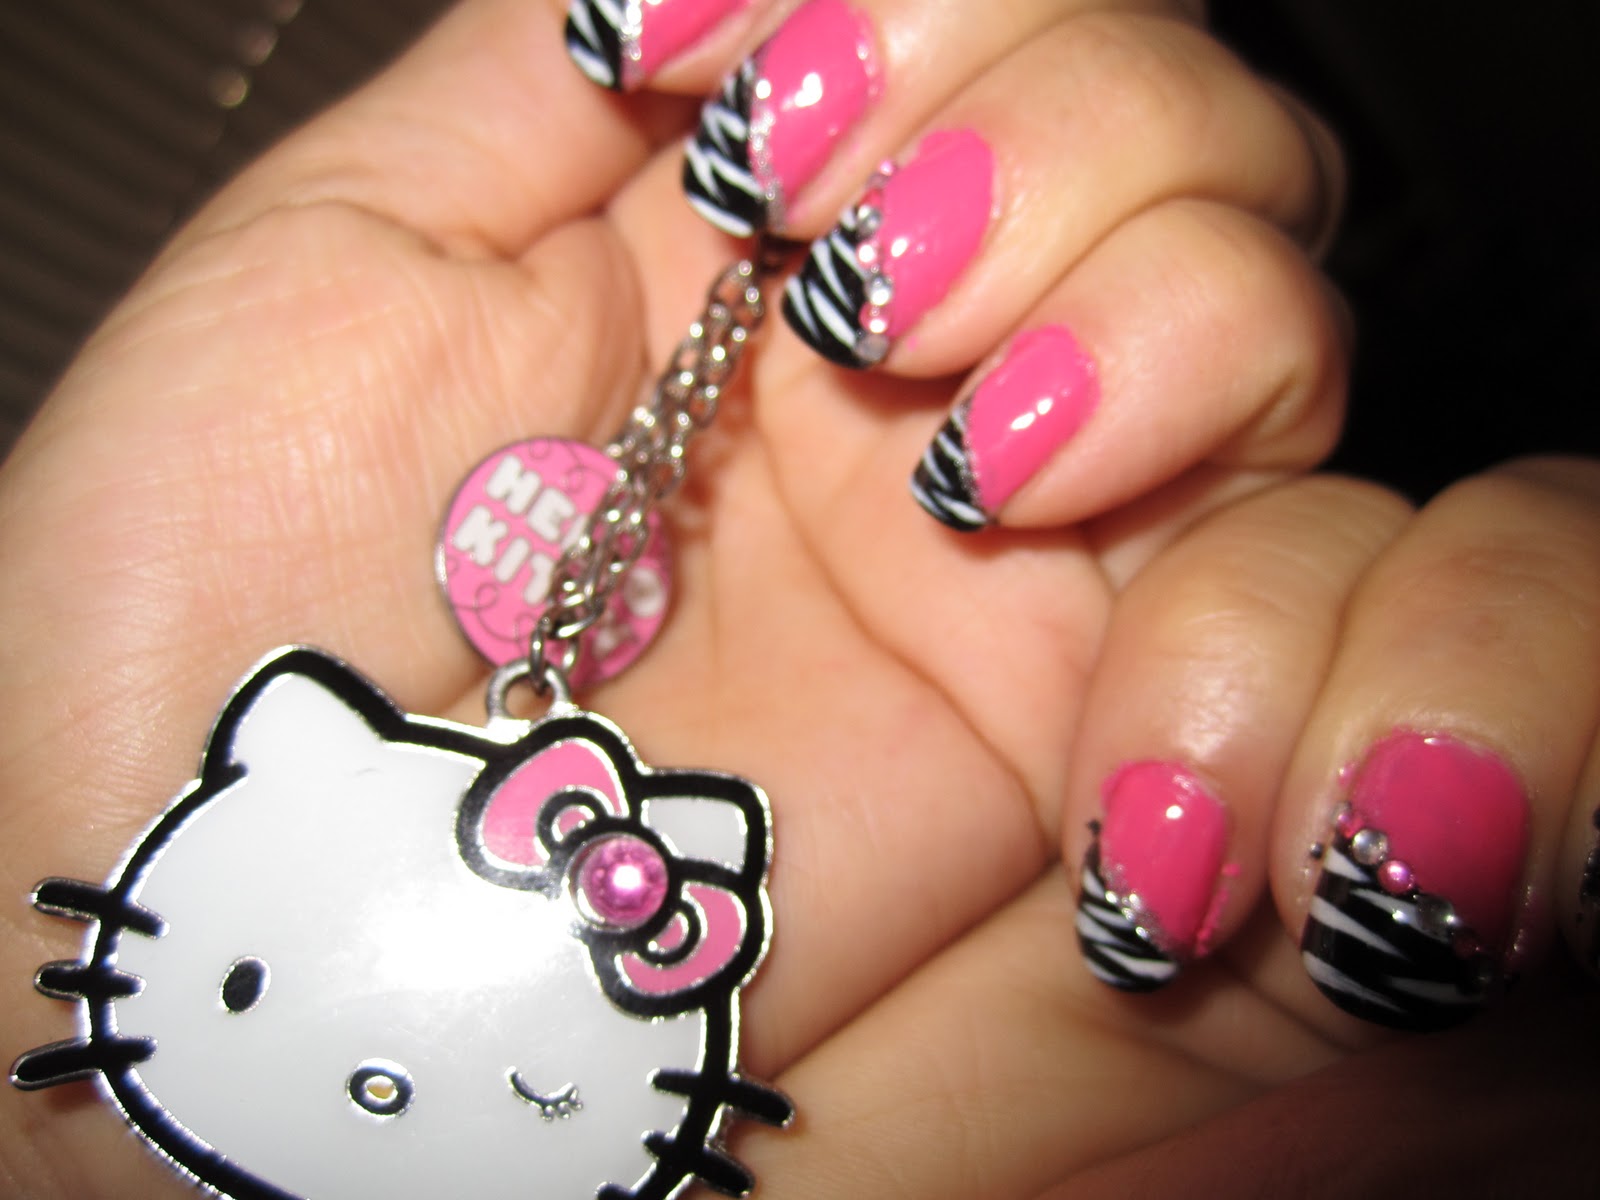 Nails Styles 2012